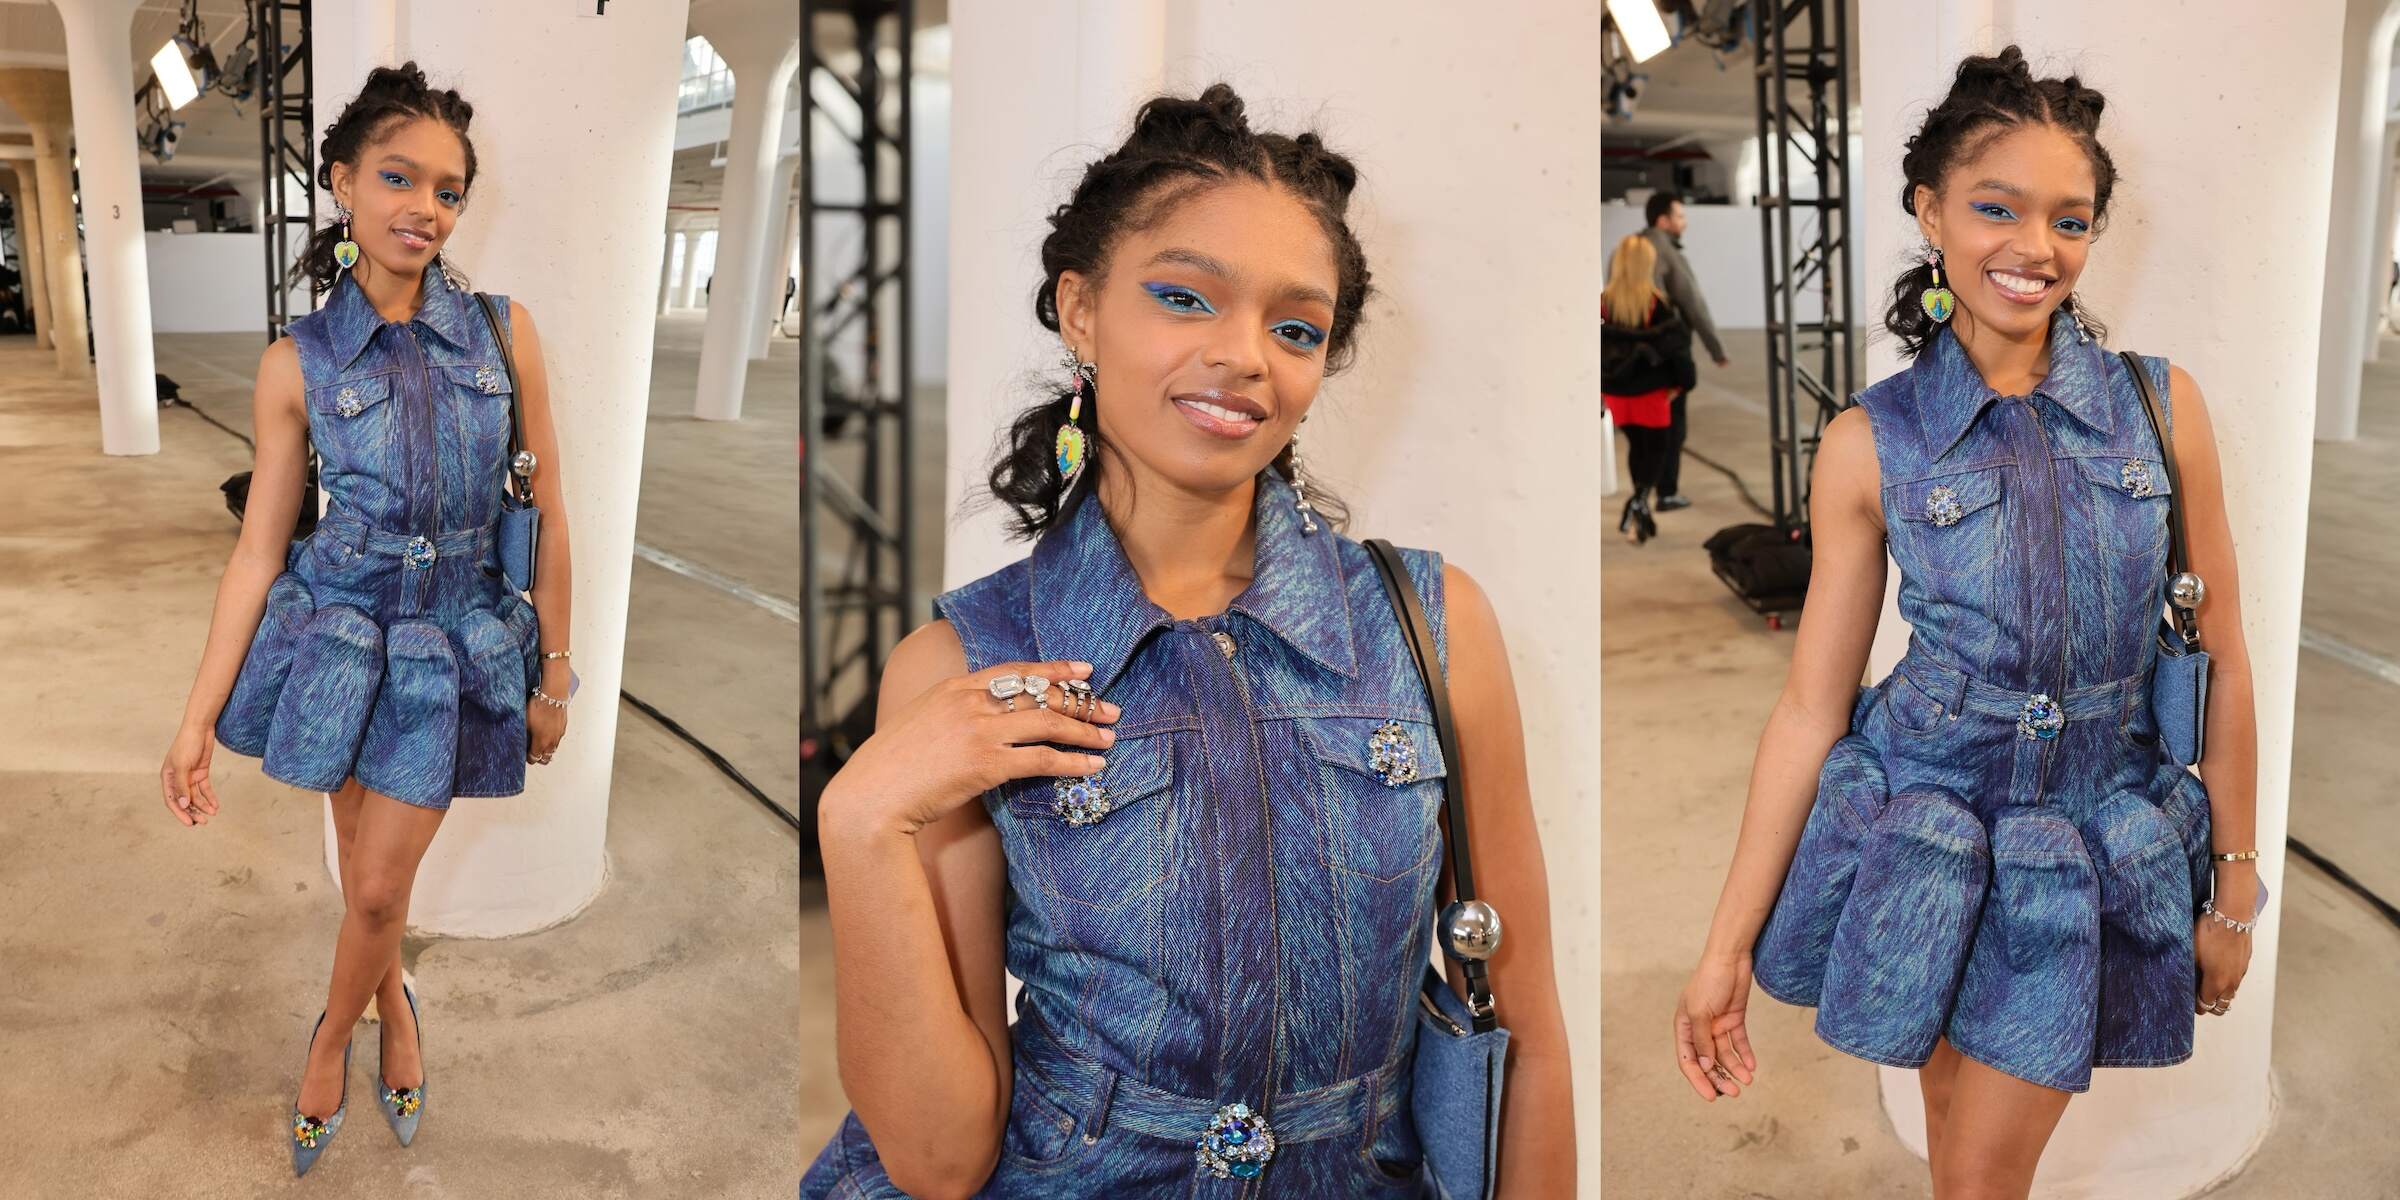 Wearing a blue denim dress, Selah Marley poses before the Area fashion show during New York Fashion Week